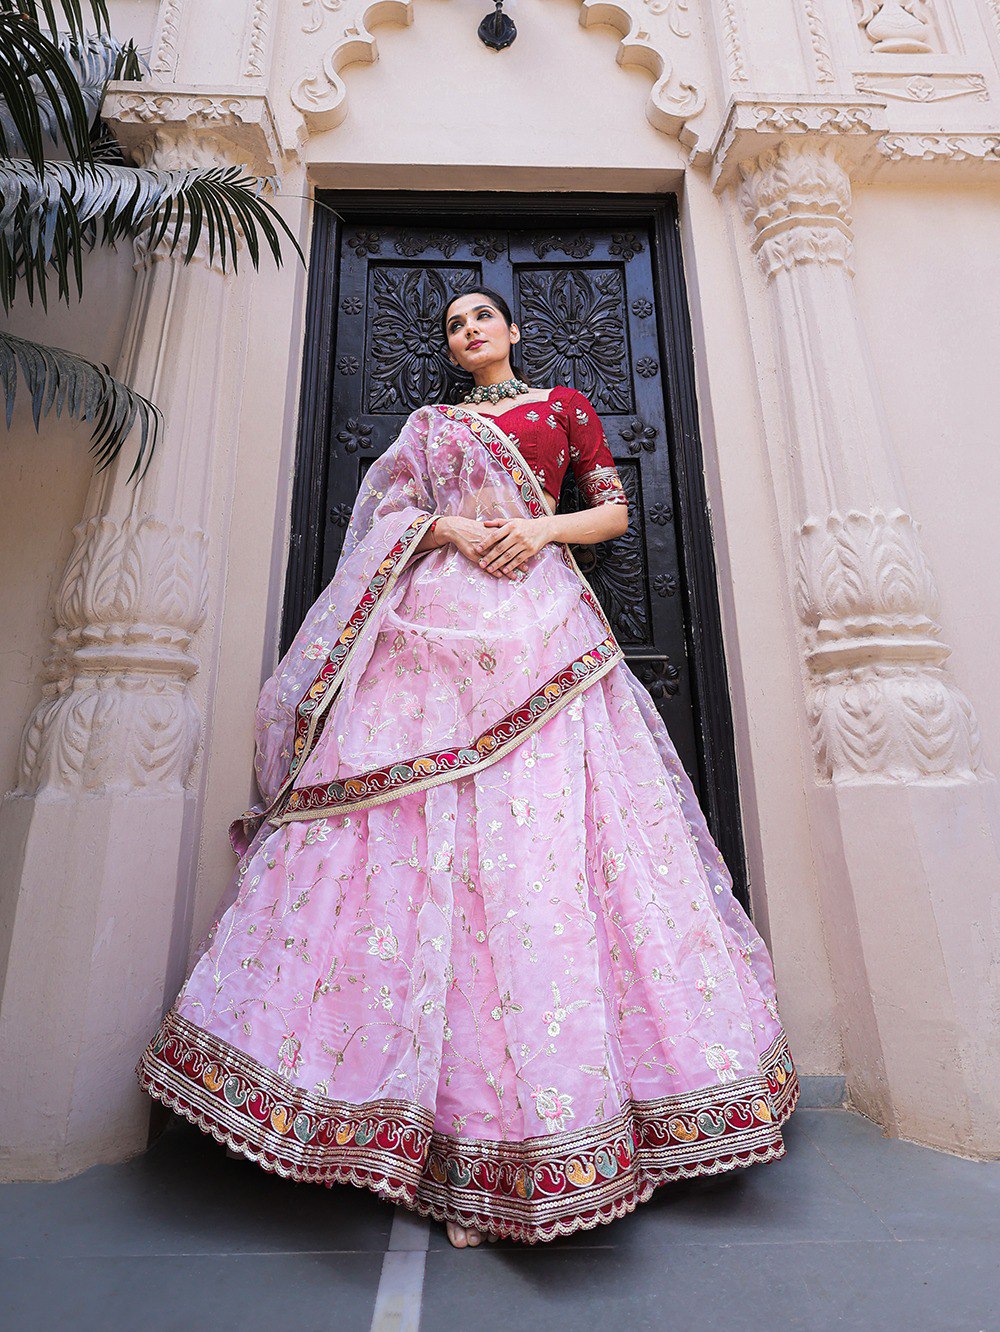 Light Pink Color Thread Embroidery Work With Lace Border Organza Lehenga Choli